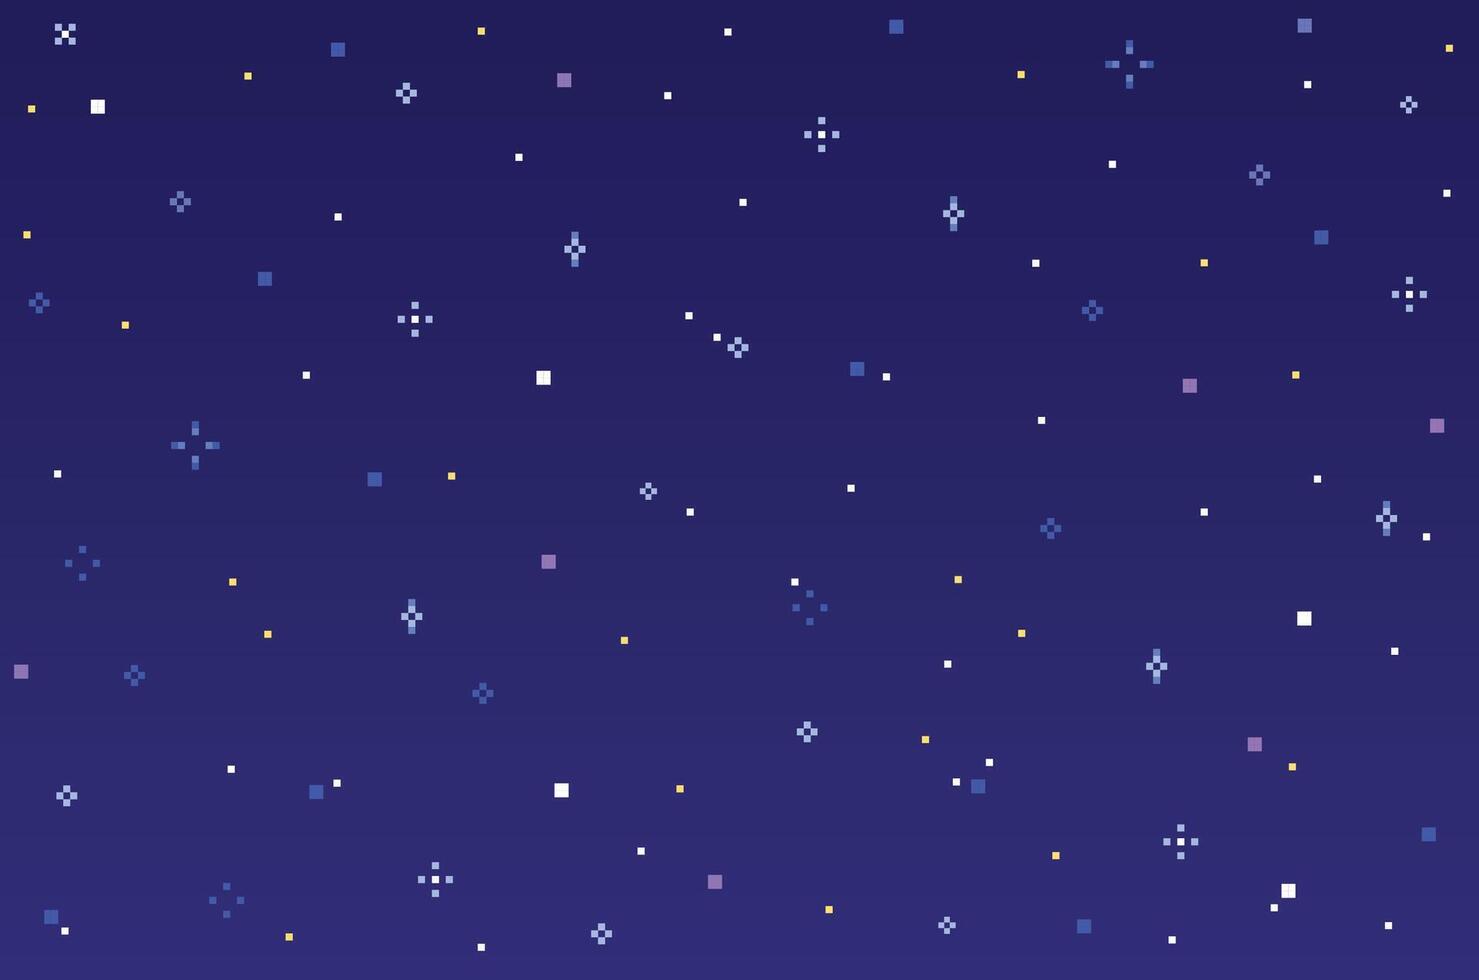 Pixel art night sky. Retro 8-bit game evening background with stars. Flat halftone pattern for mobile interface game. Blue colors on backdrop. Vector illustration